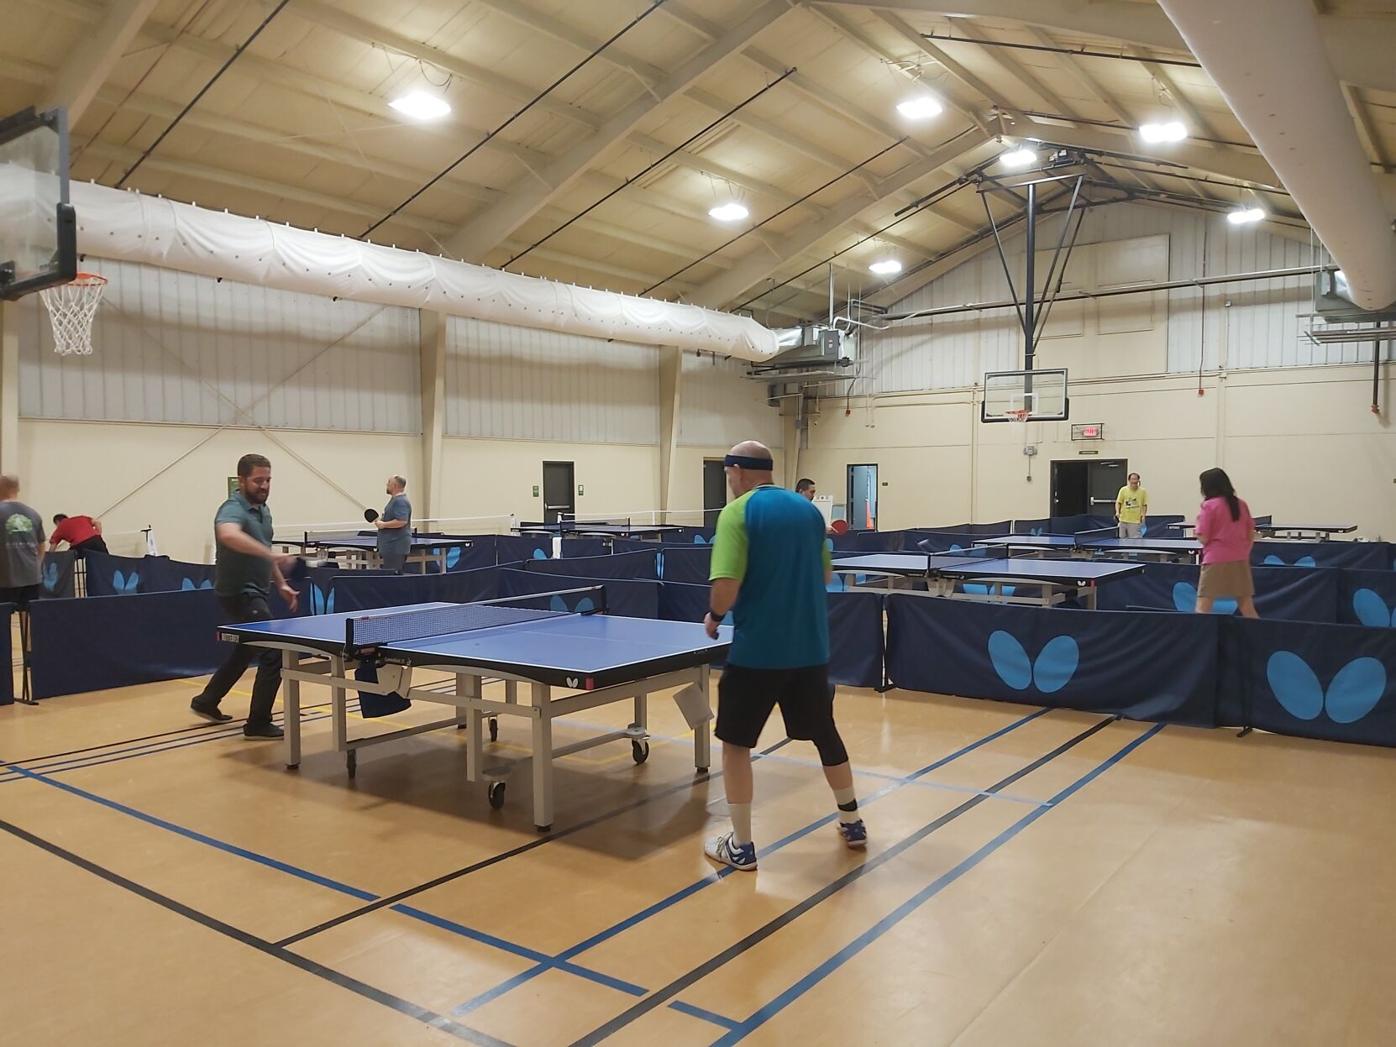 Brttc Ping Pong For All In Baton Rouge